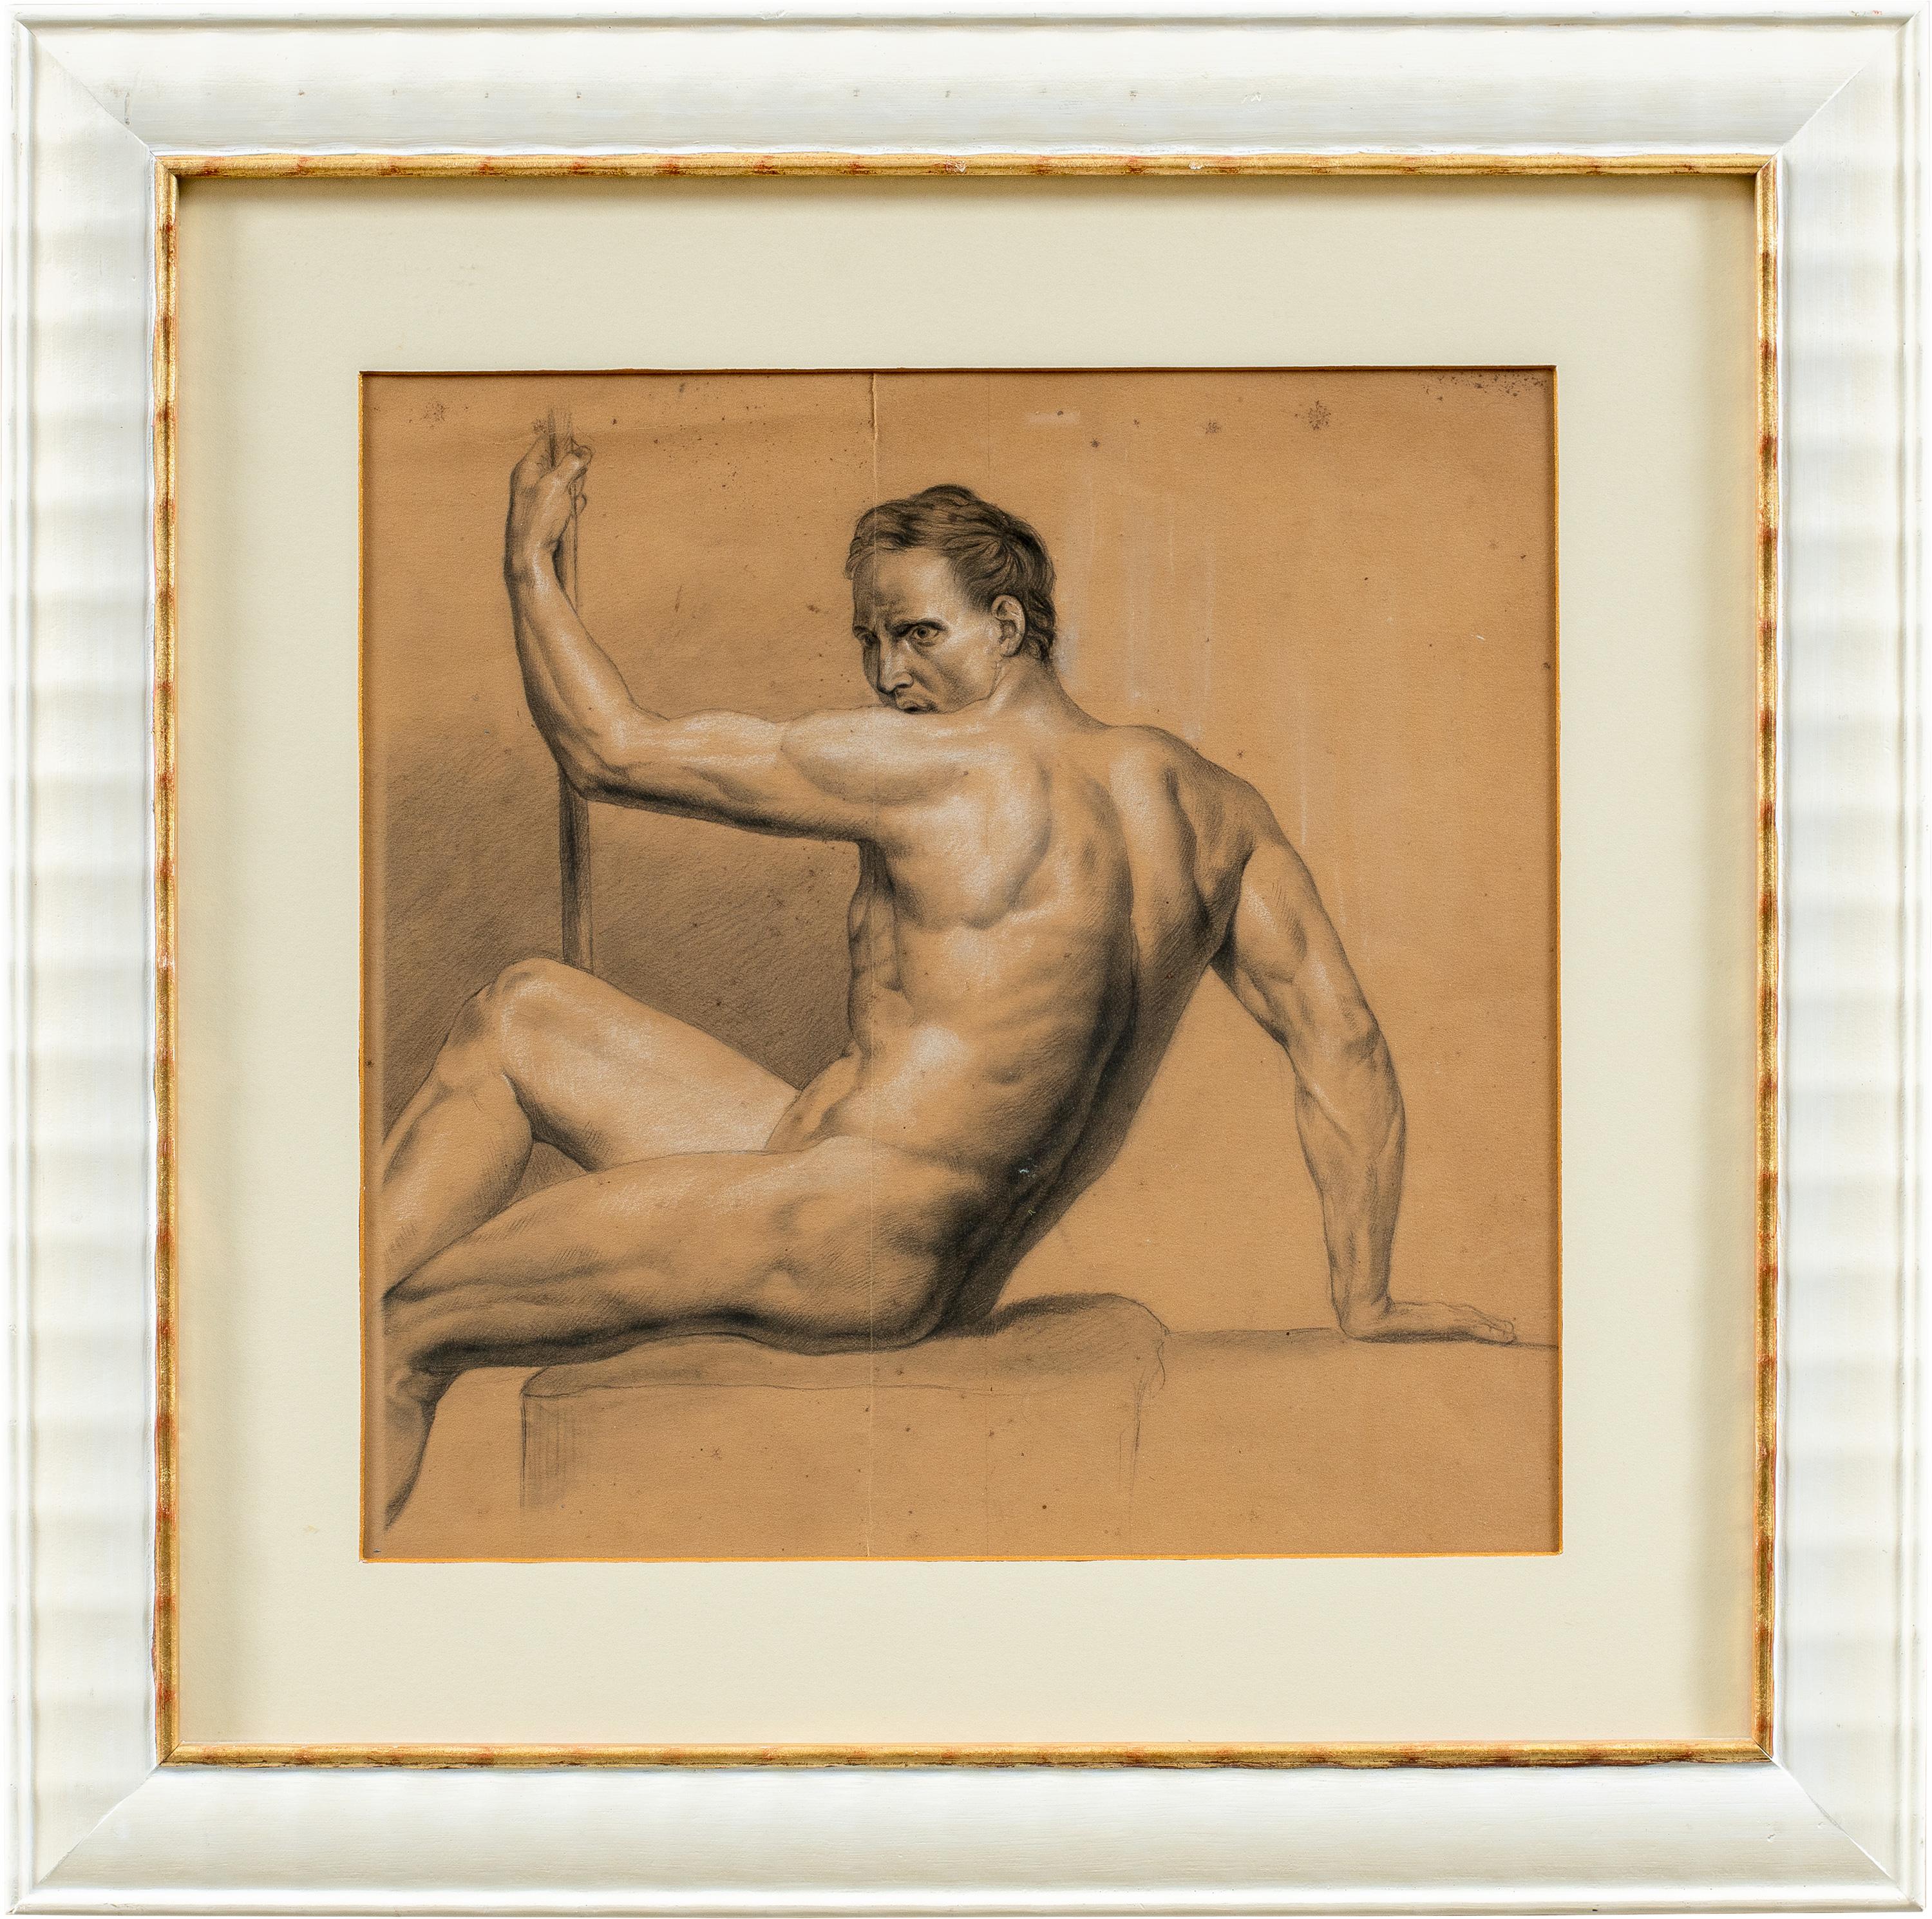 Unknown Figurative Art - Academic nudes painter - 19th century figure drawing - Pencil paper Italy